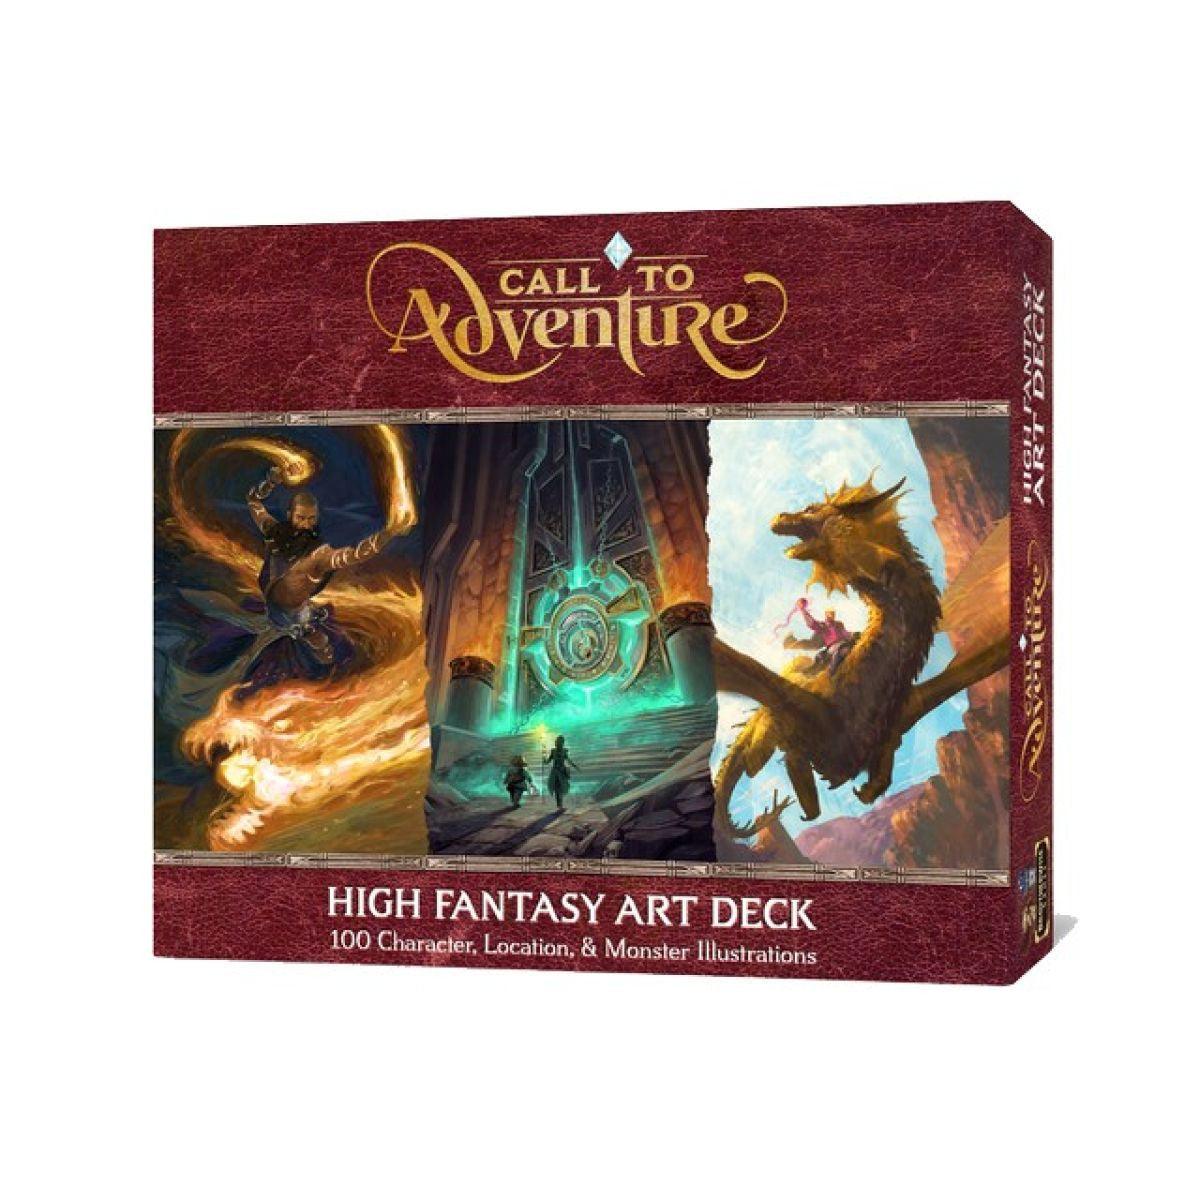 VR-98275 Call to Adventure High Fantasy Art Deck - Brotherwise Games - Titan Pop Culture